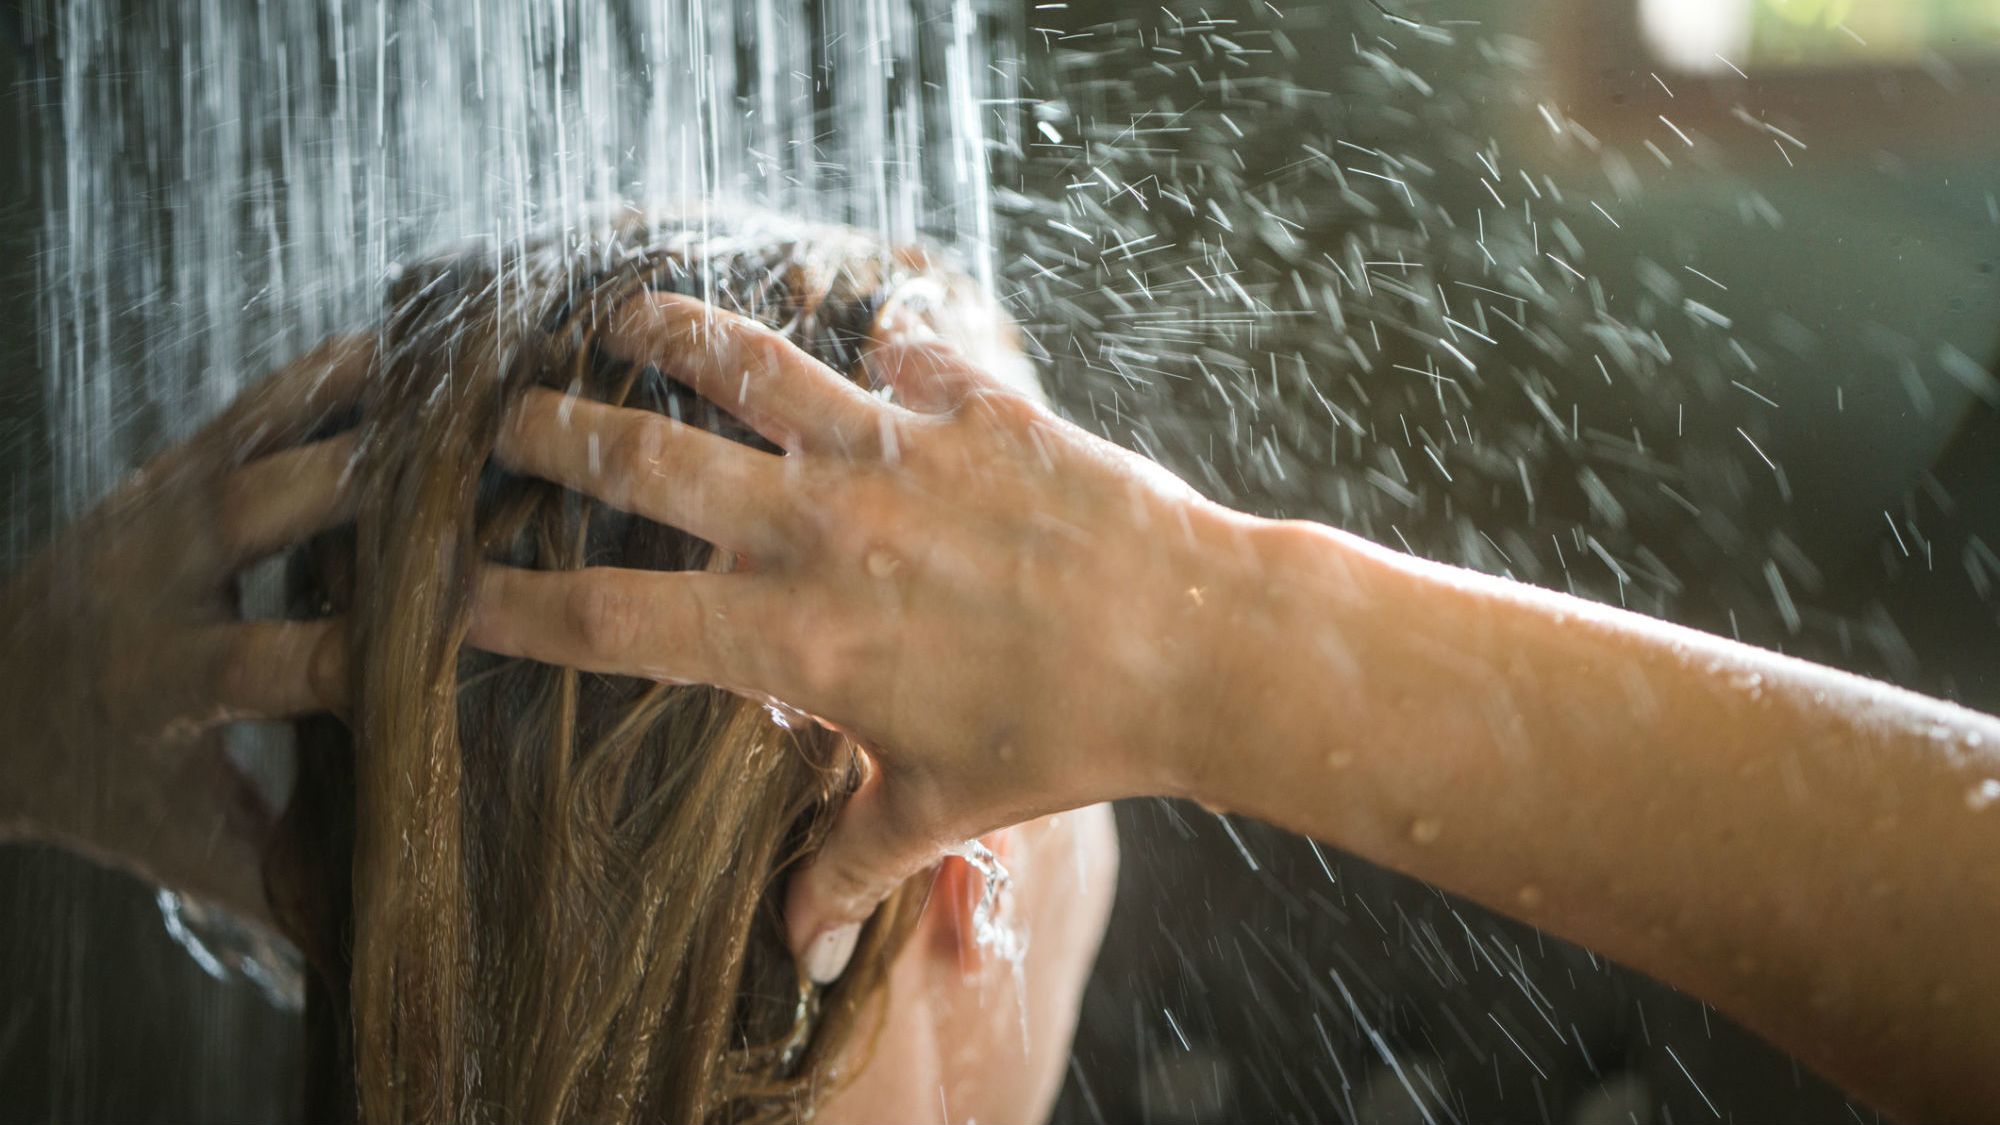 The Best Way To Shower According To Experts Mental Floss 